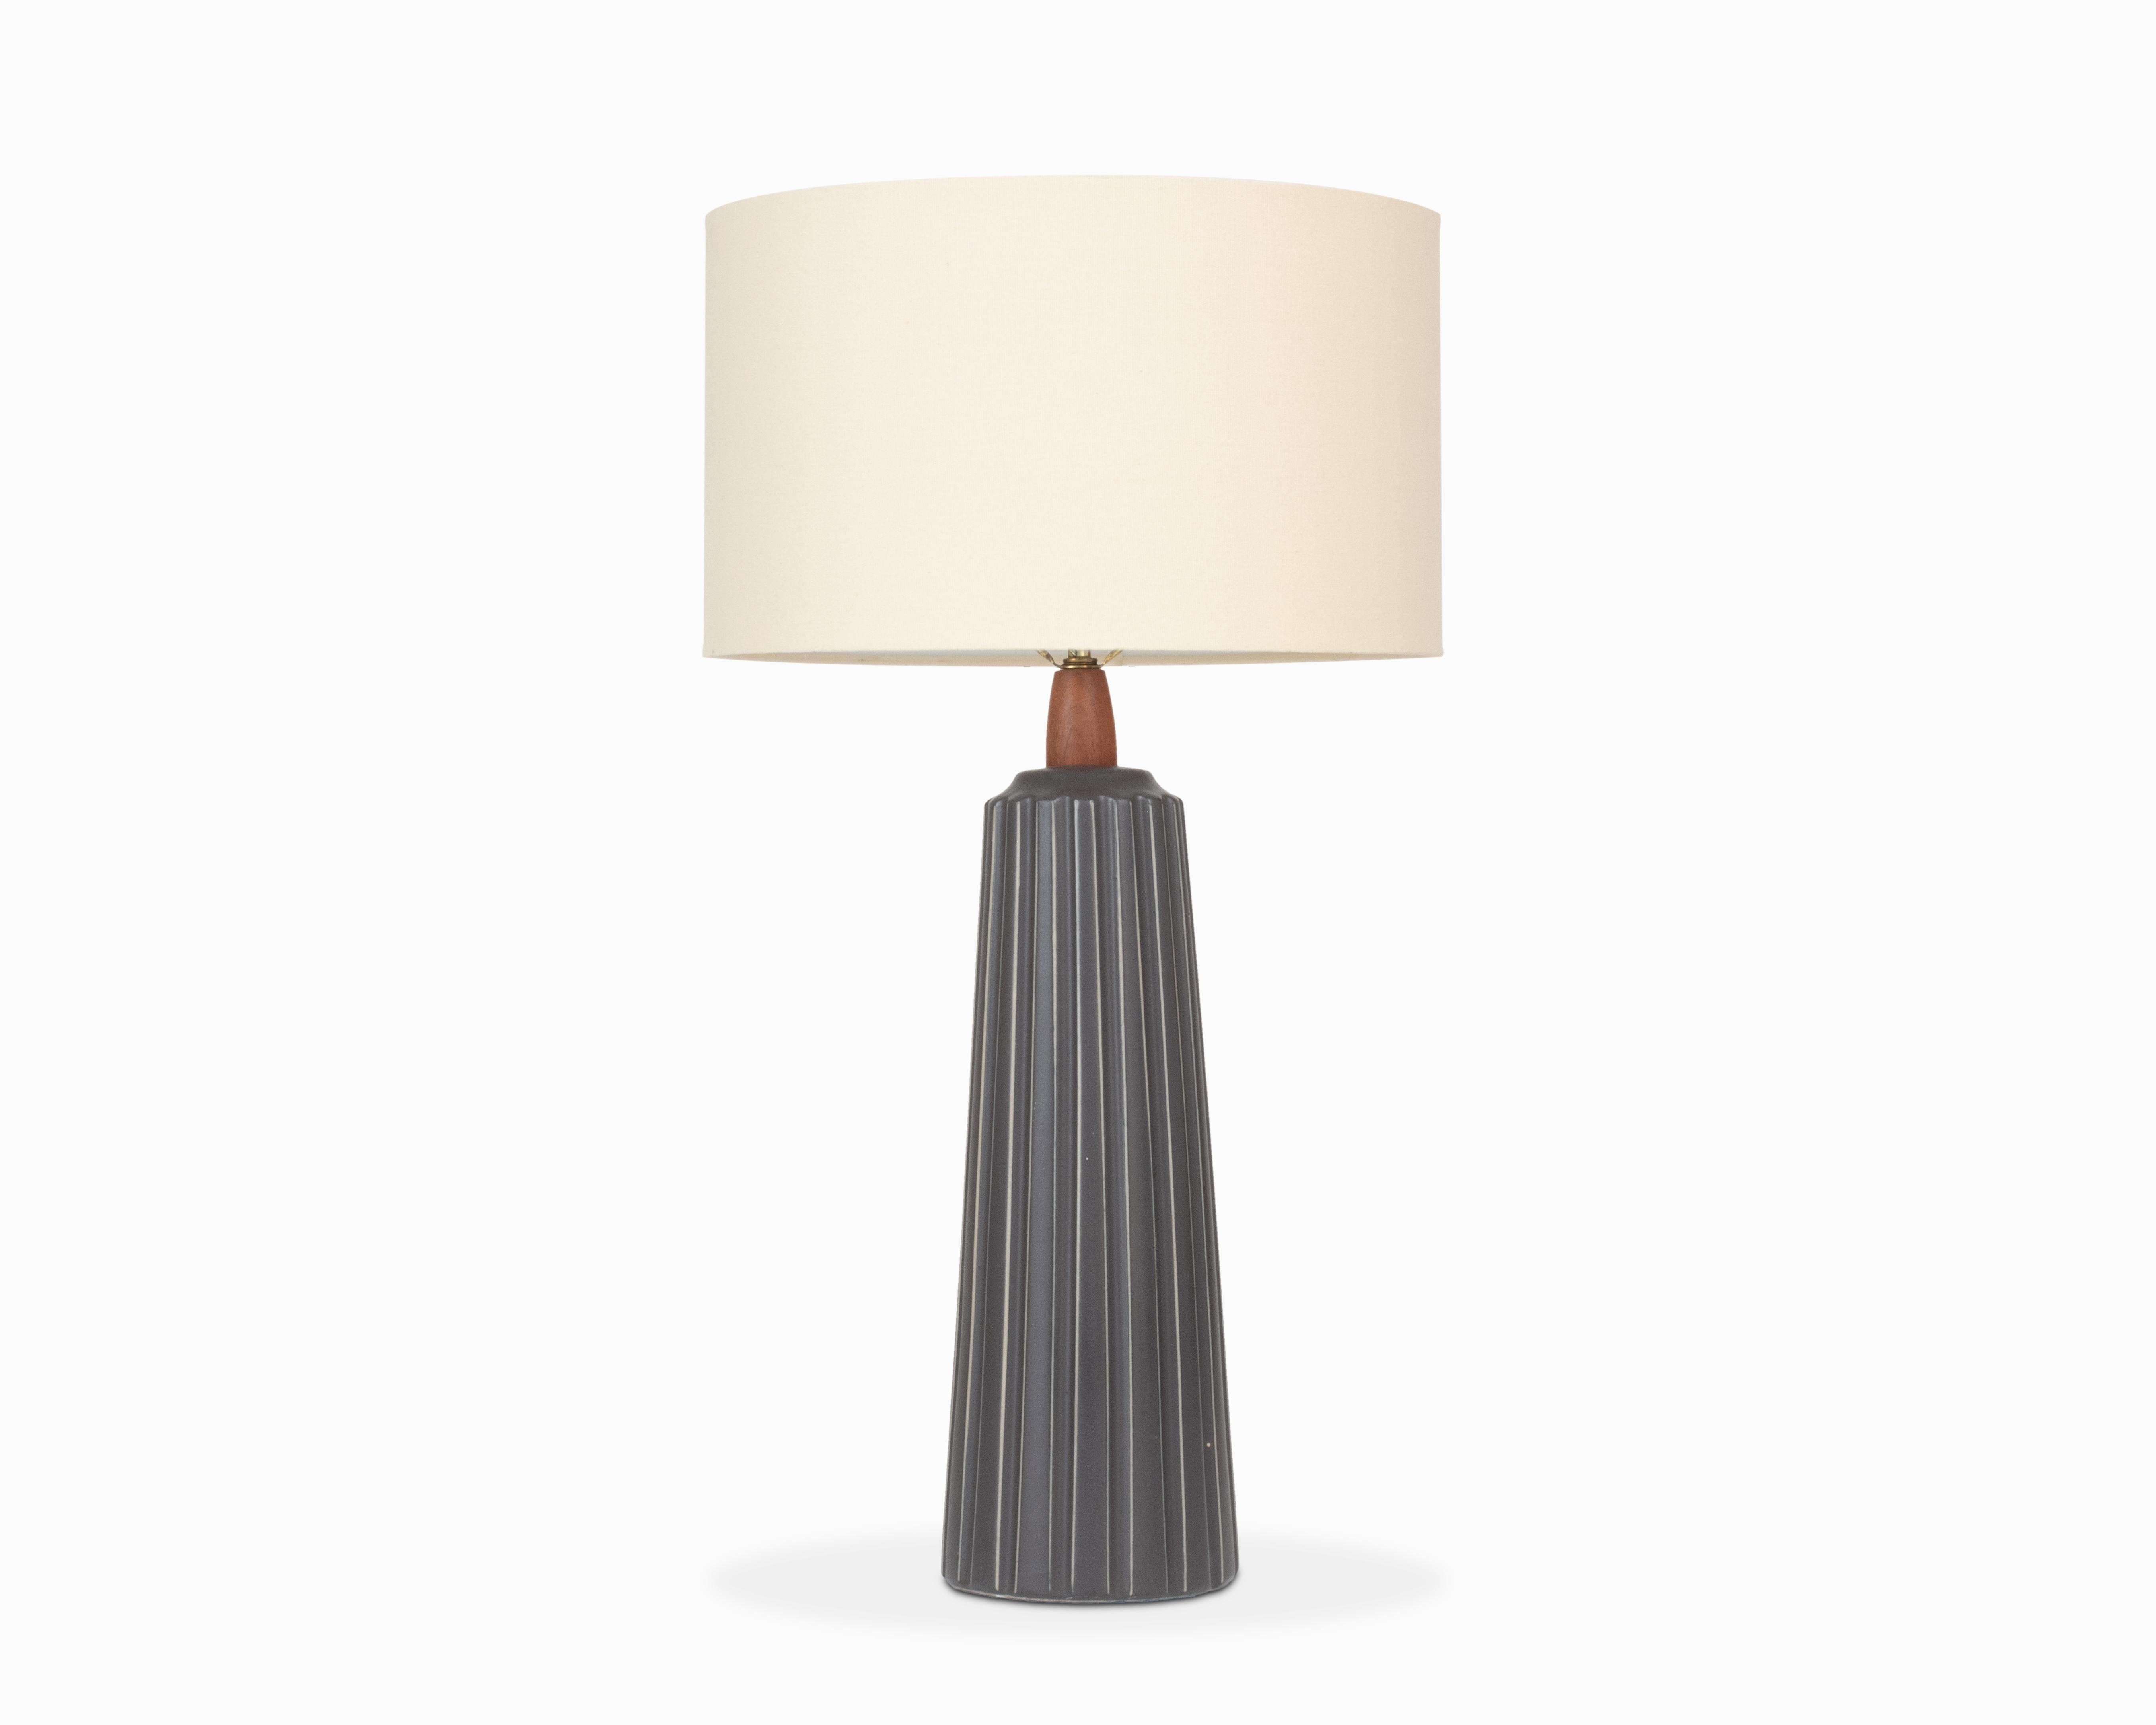 Here is a beautiful ceramic table lamp by Jane and Gordon Martz / Marshall Studios. Model 254 in matte dark grey. It features a monumental fluted ceramic base with vertically striped incising and walnut details. The lamp is in excellent shape with